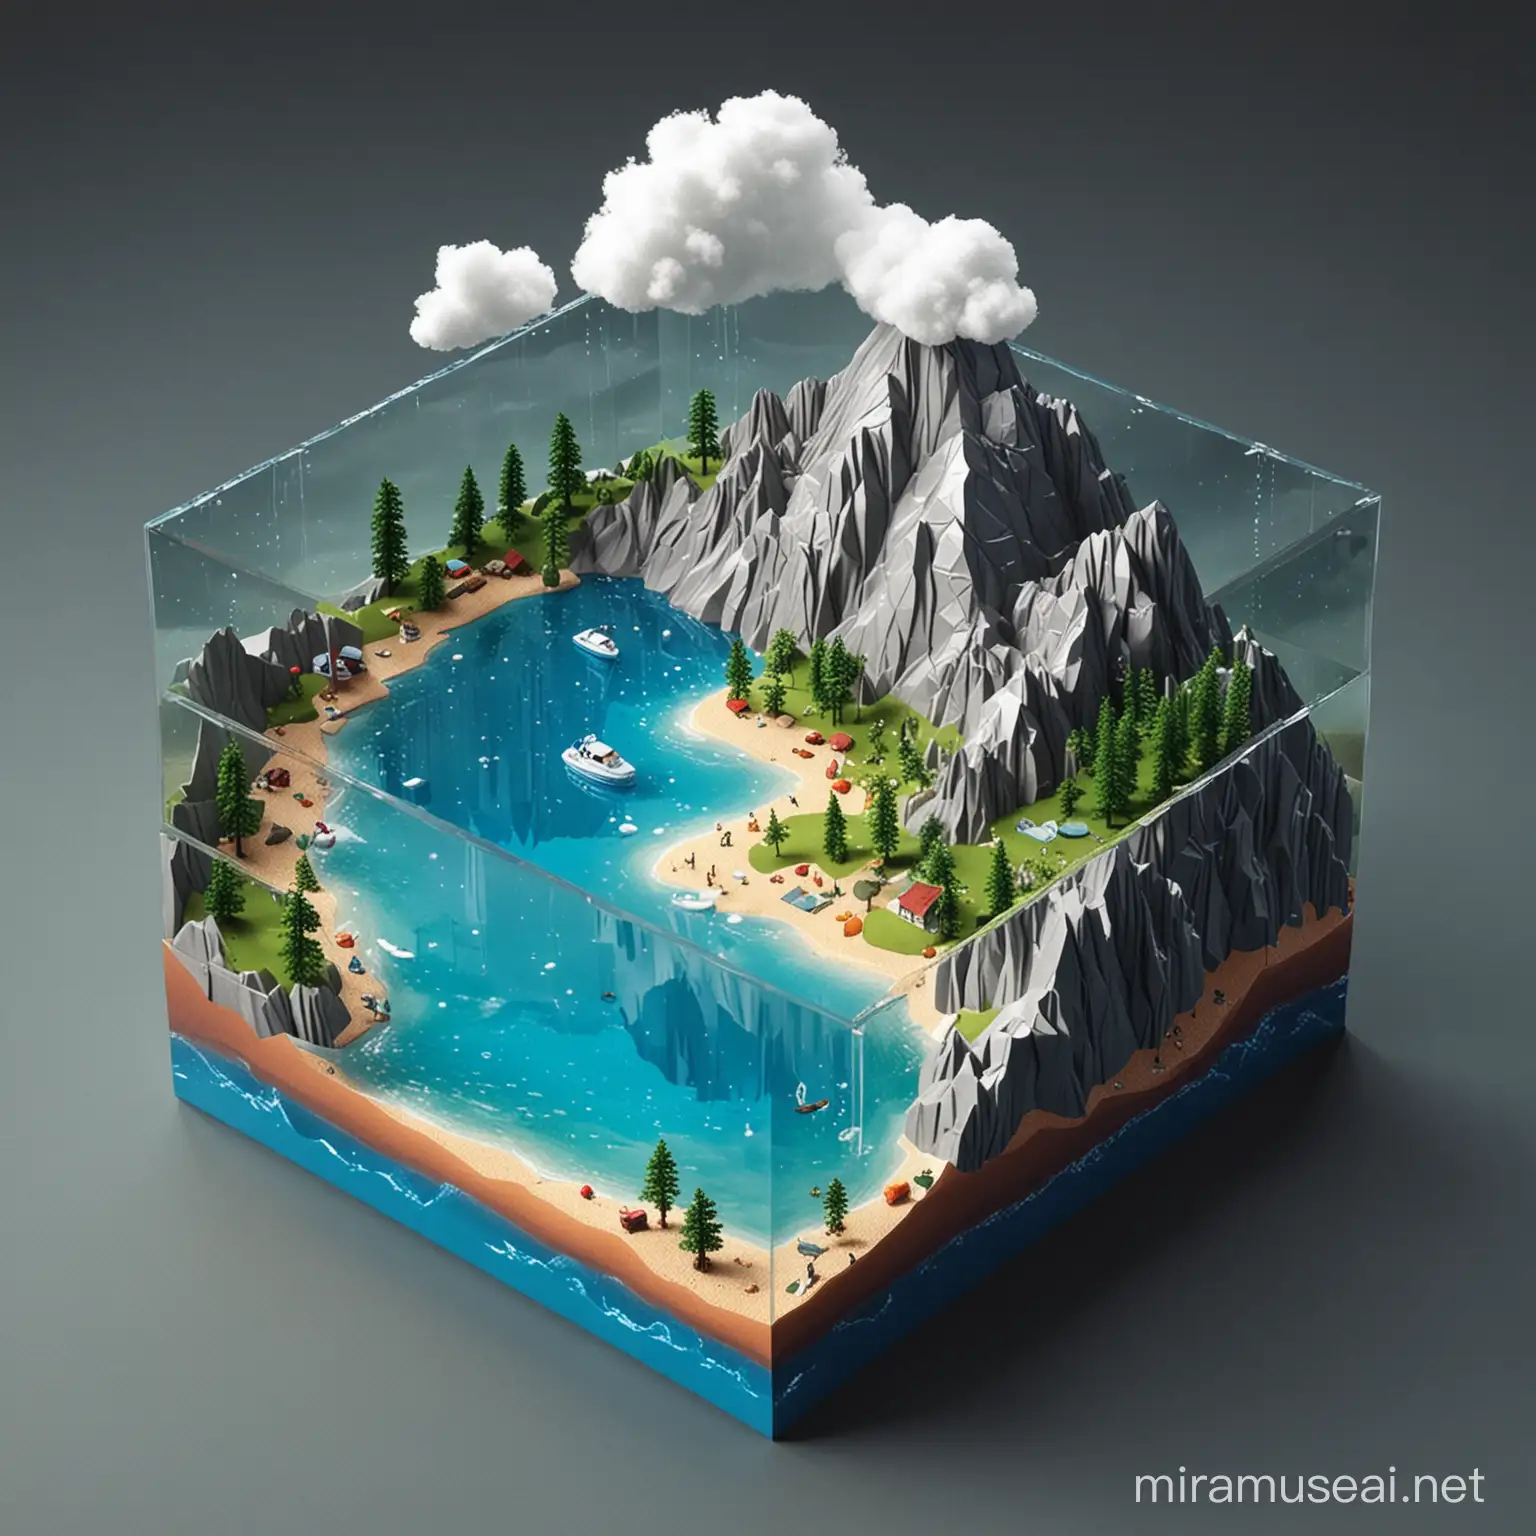 make a image of 3d isometric of hydrosphere model with the size of 25cm x 25cm. There is a mountain, a lake and a beach, a cloud, a dark cloud with rain. the base is square